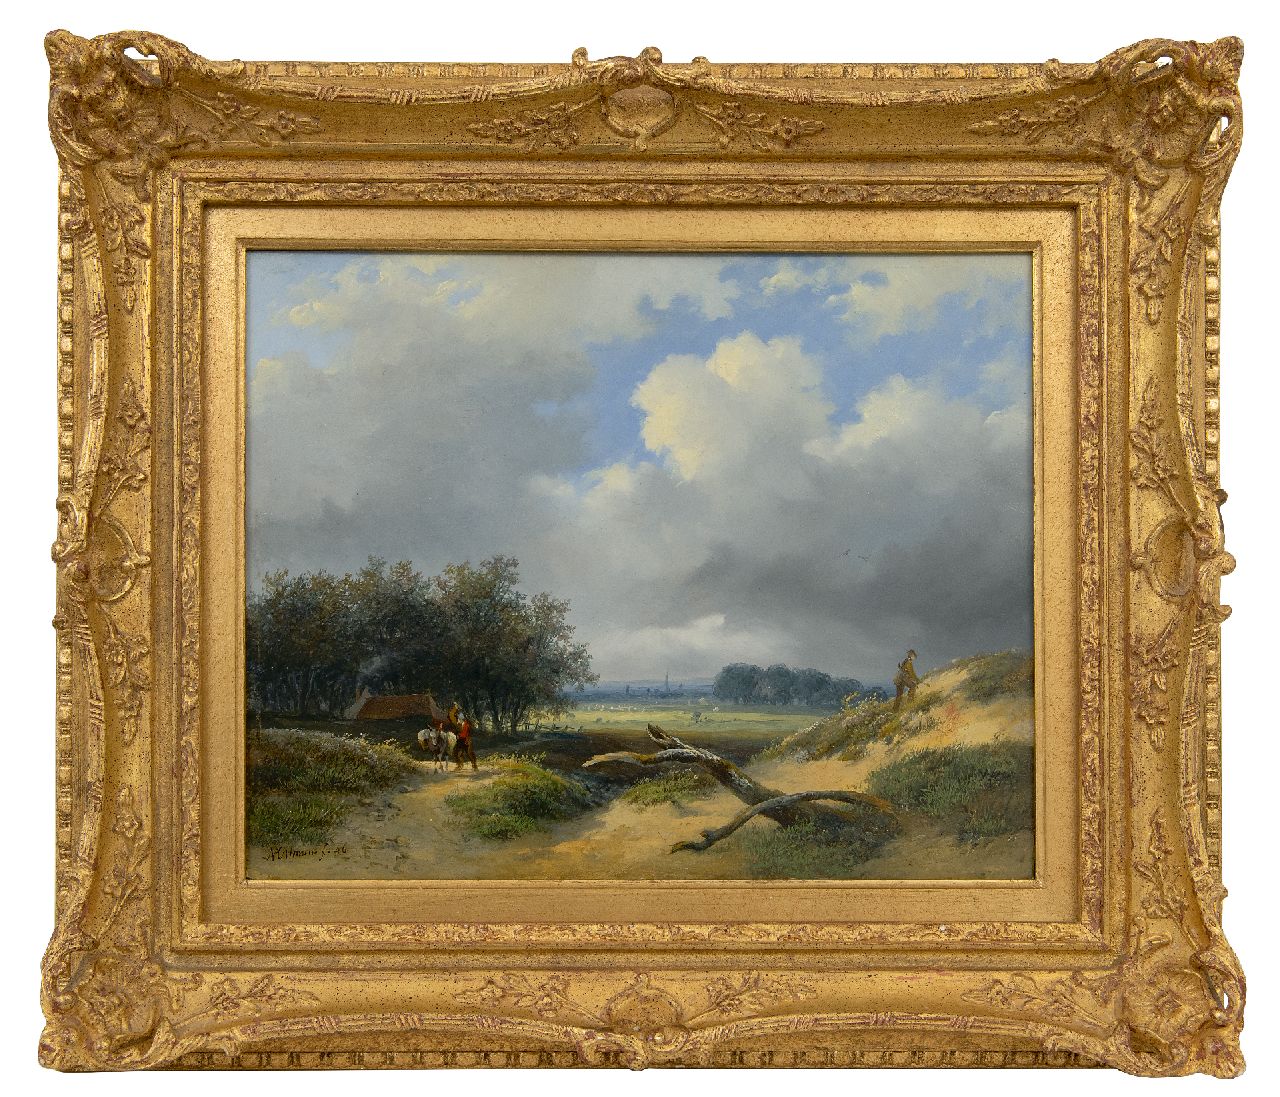 Ortmans F.A.  | François Auguste Ortmans | Paintings offered for sale | Valley landscape with hunter and farmer, oil on panel 23.4 x 29.4 cm, signed l.l. and dated '46